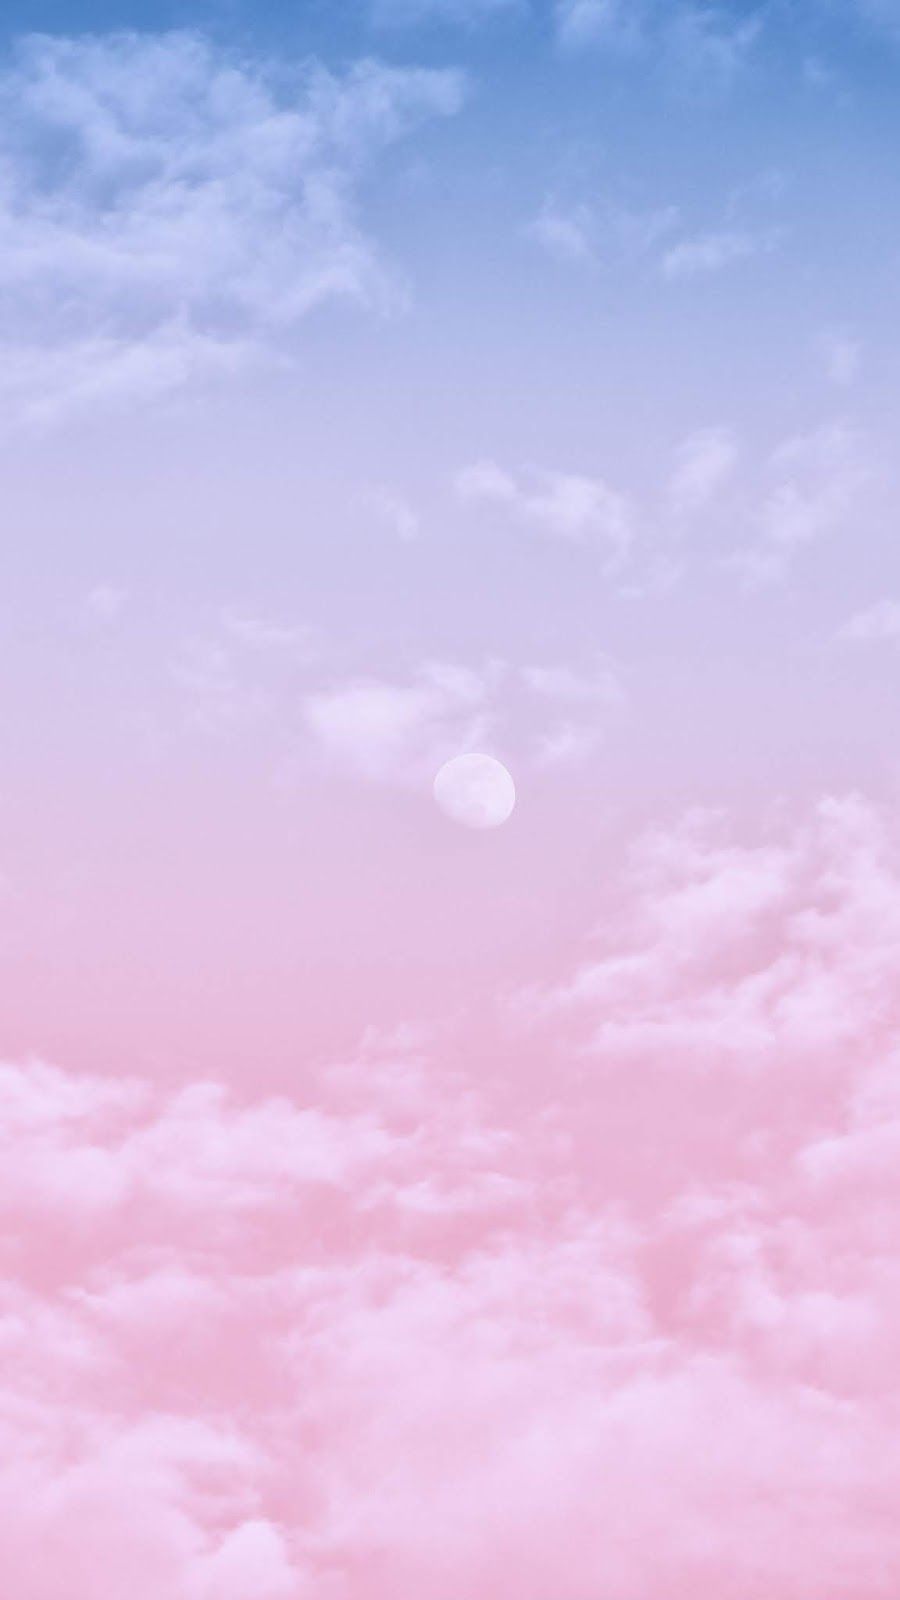 Gradient clouds #wallpaper #iphone #android #background #followme. Pink clouds wallpaper, iPhone wallpaper sky, Wallpaper pink and blue